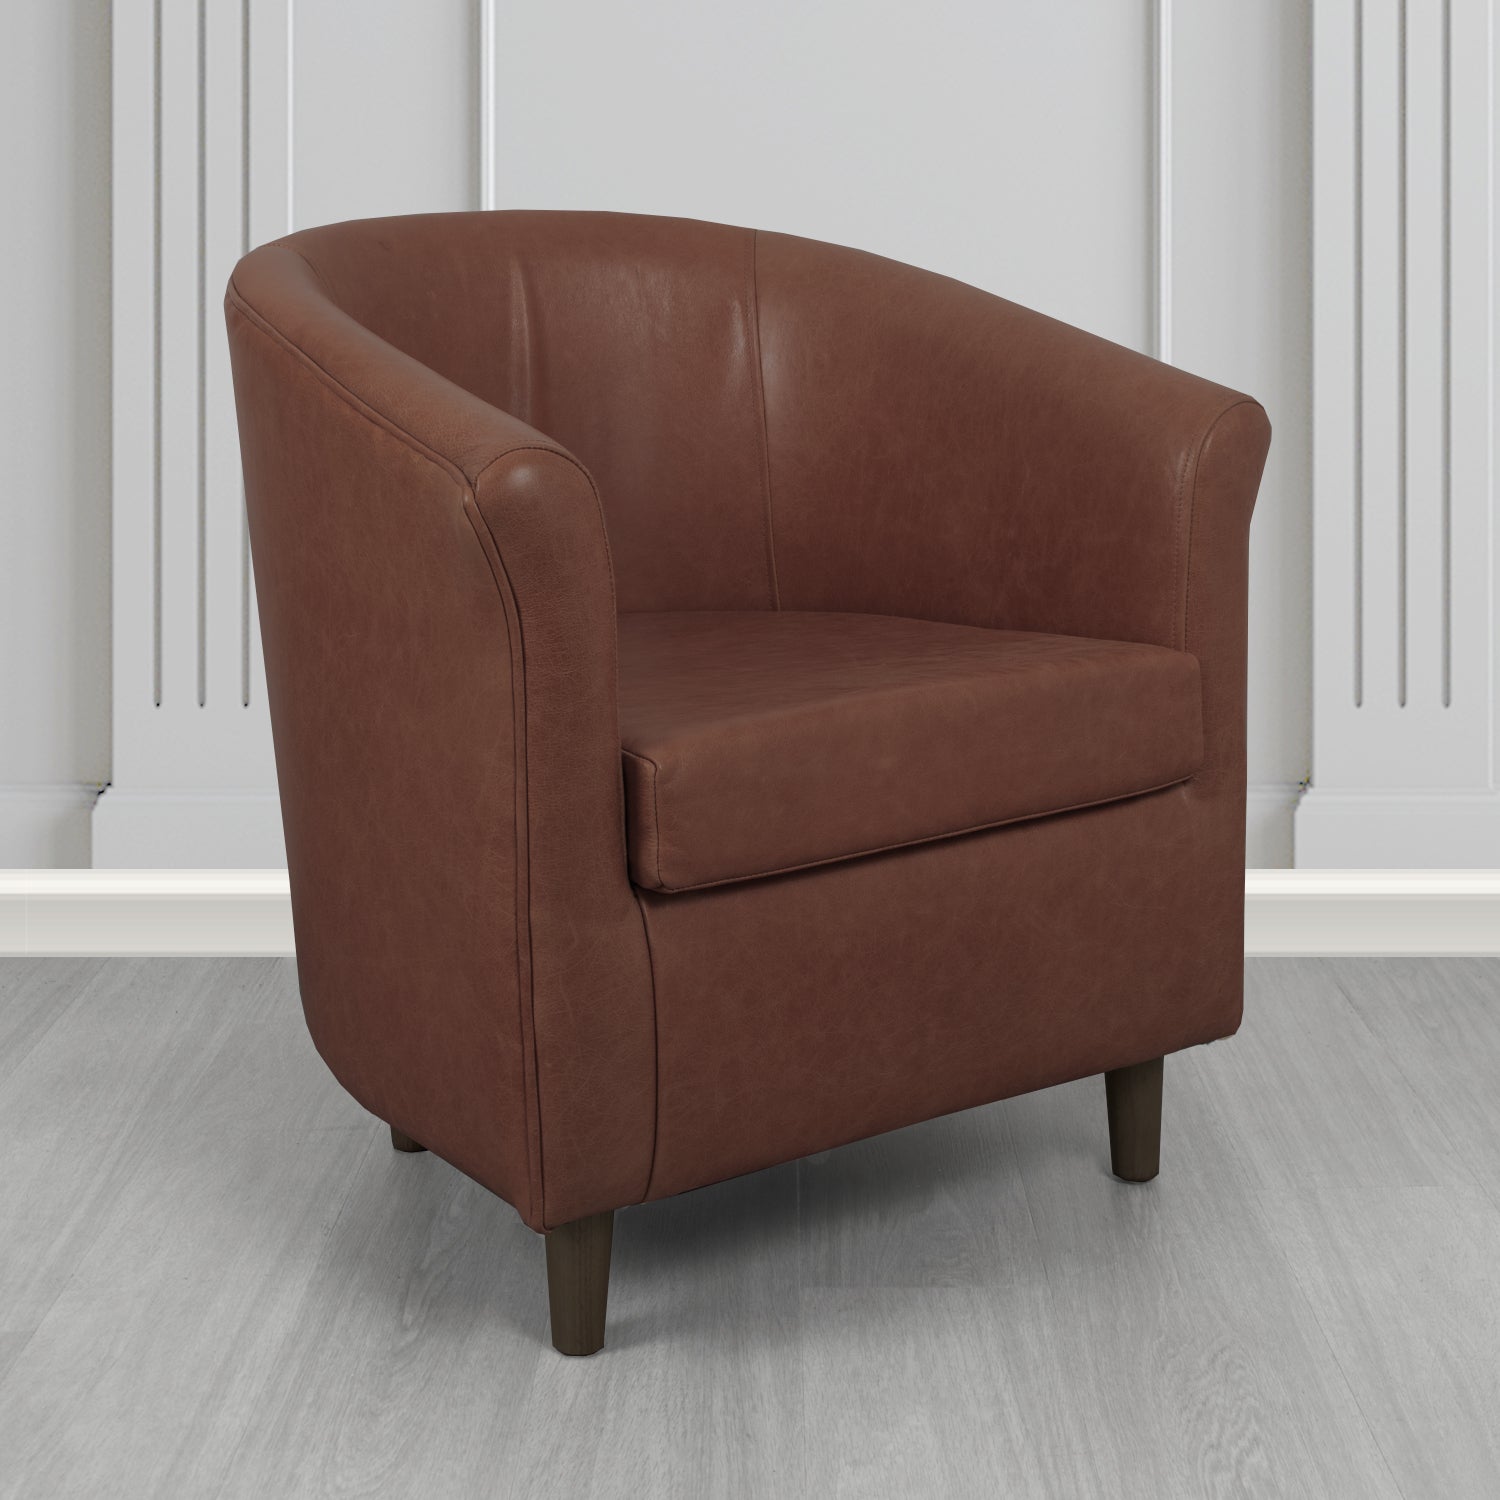 Tuscany Tub Chair in Crib 5 Old English Red Brown Genuine Leather - The Tub Chair Shop